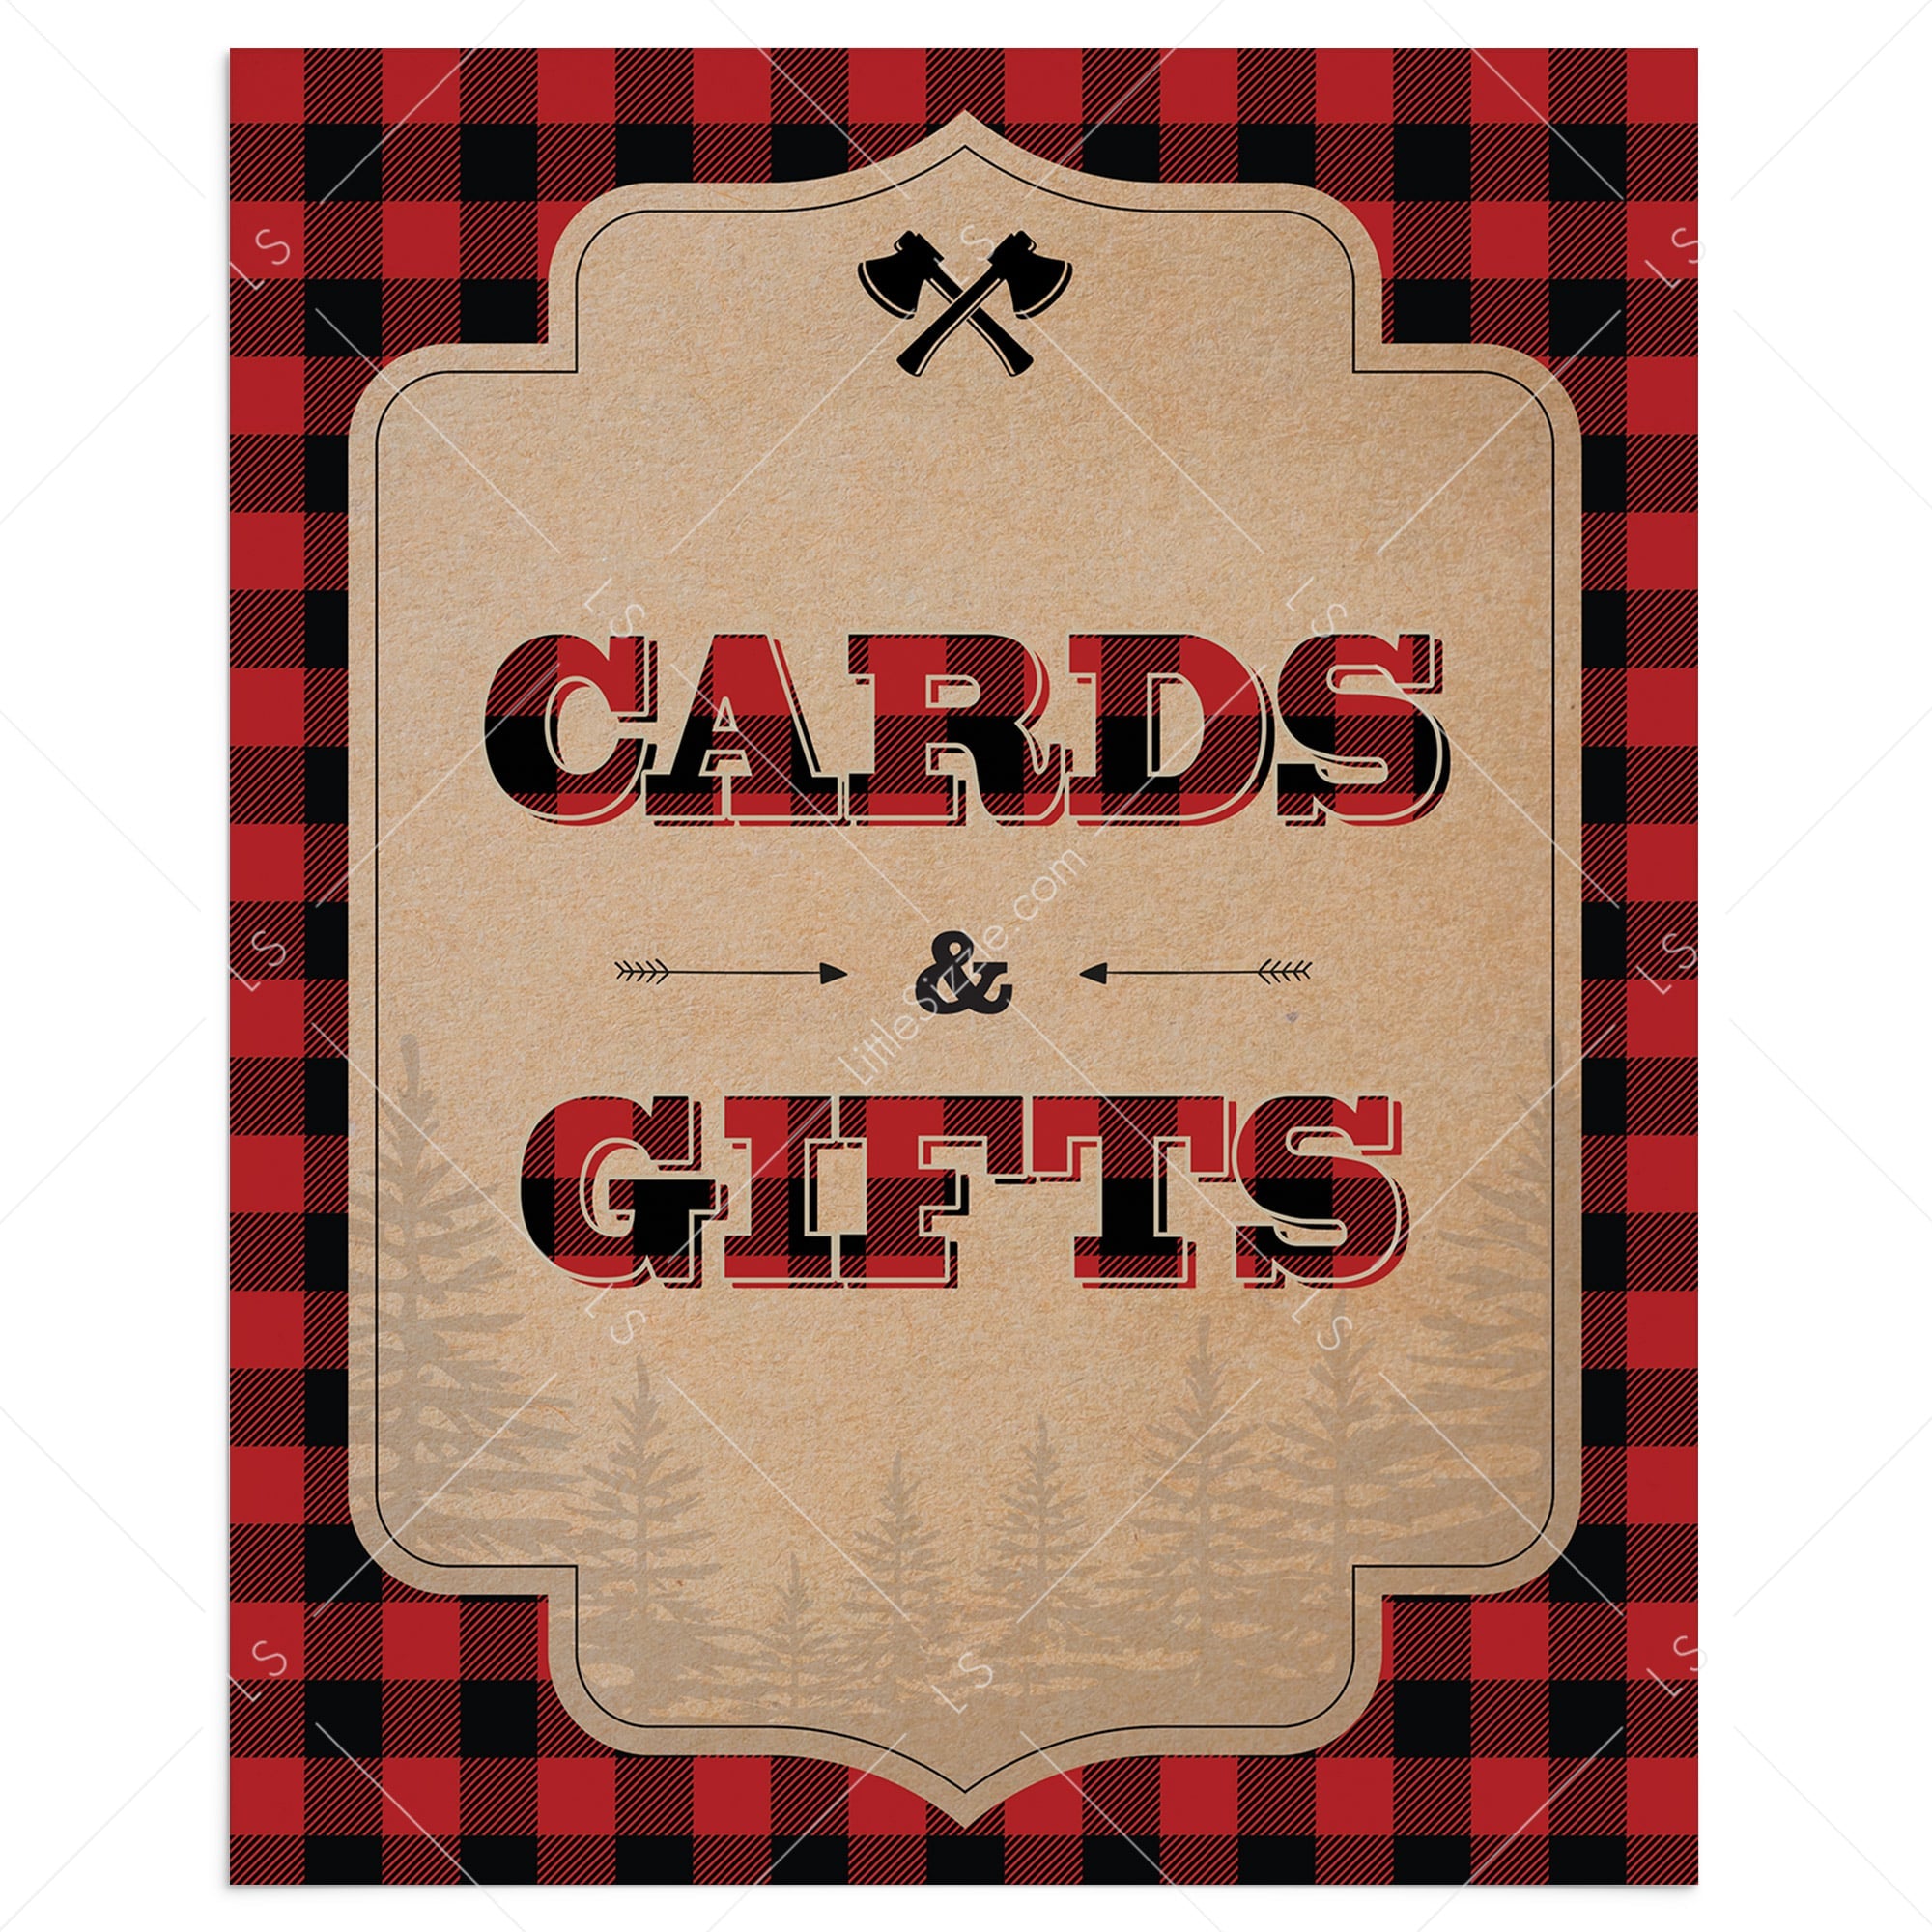 Lumberjack party cards & gifts sign printable by LittleSizzle